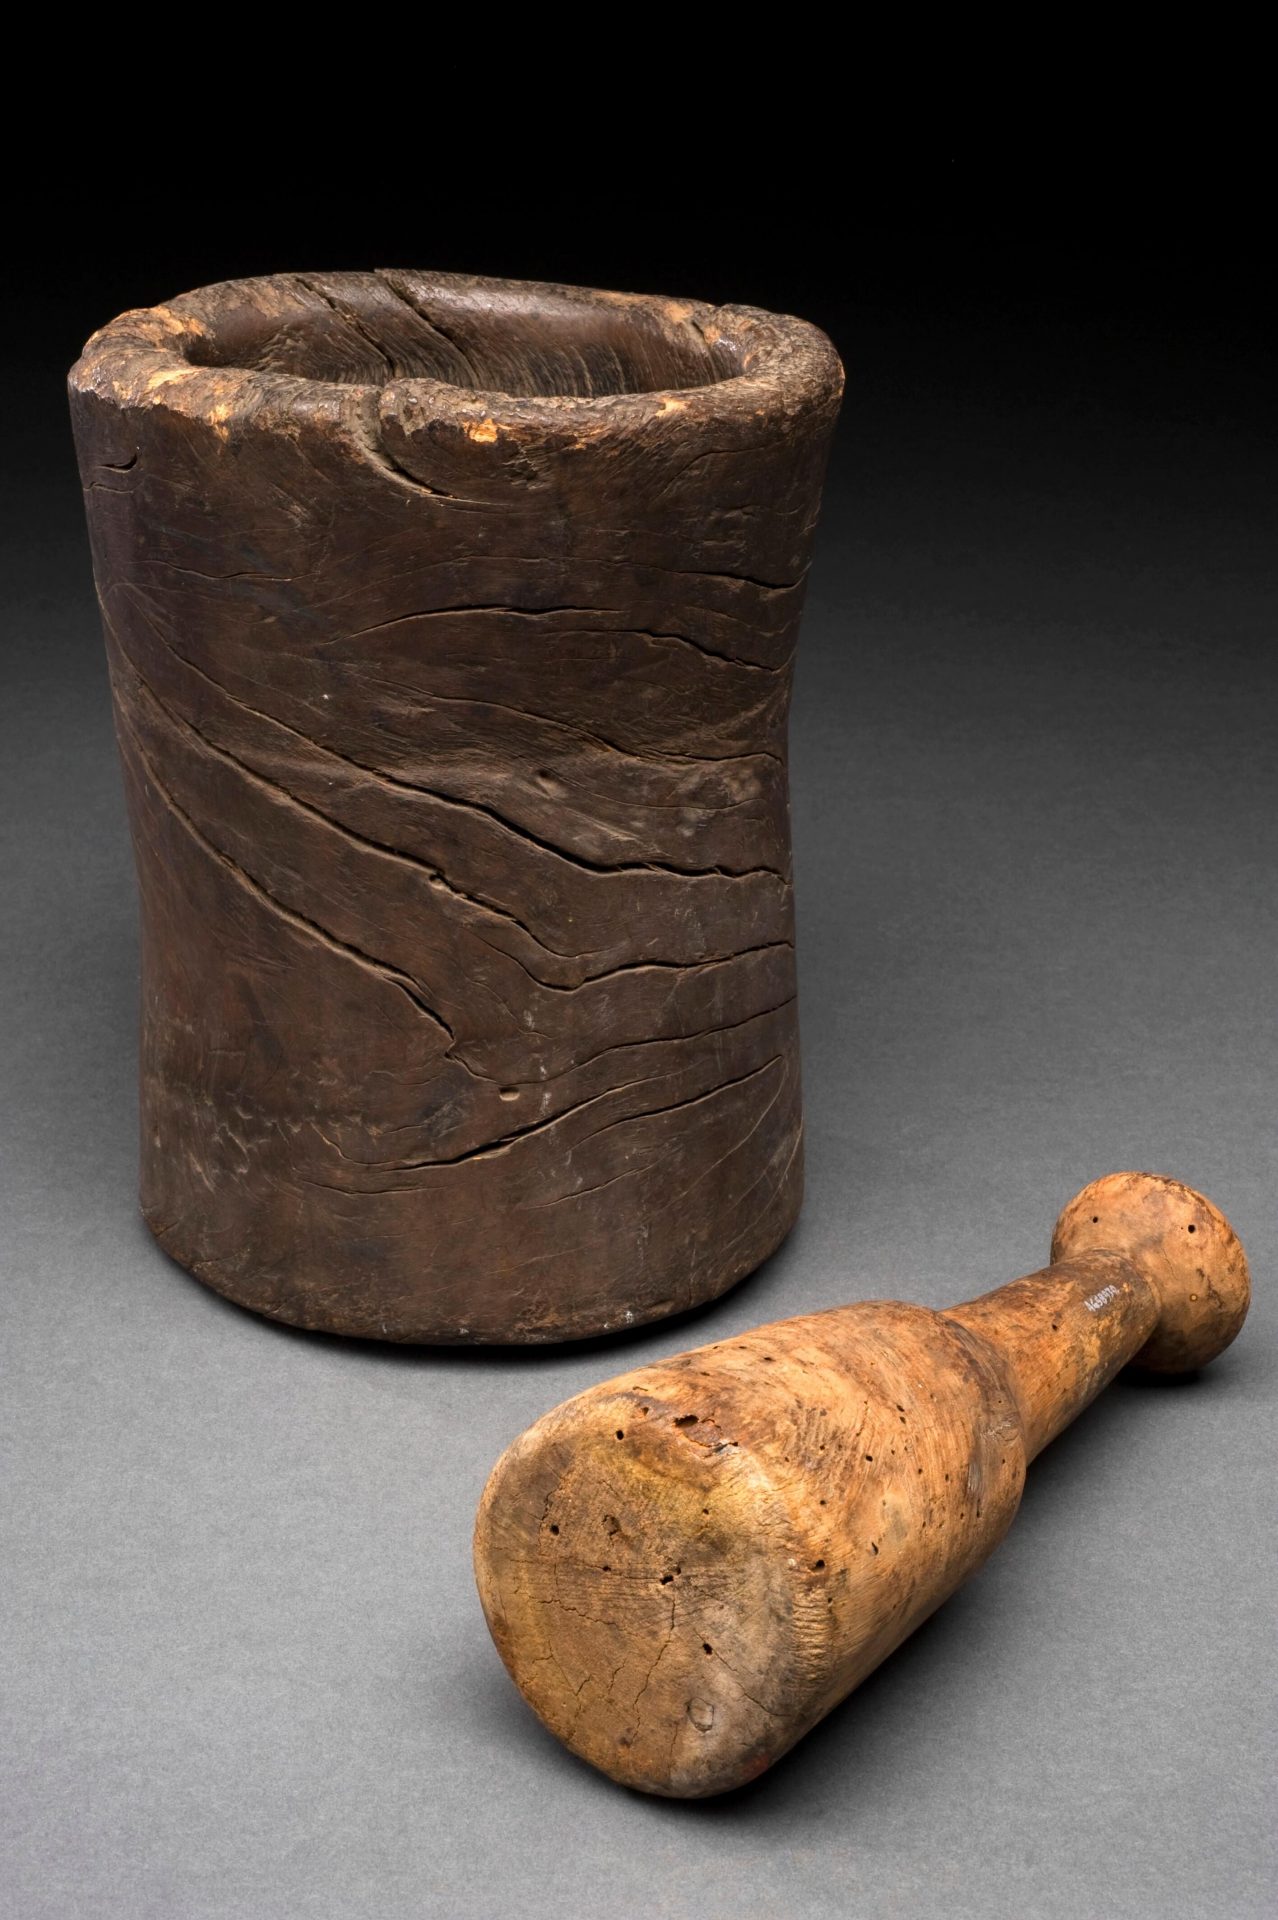 Early modern wooden mortar and pestle for making powders. Credit: Science Museum, London.